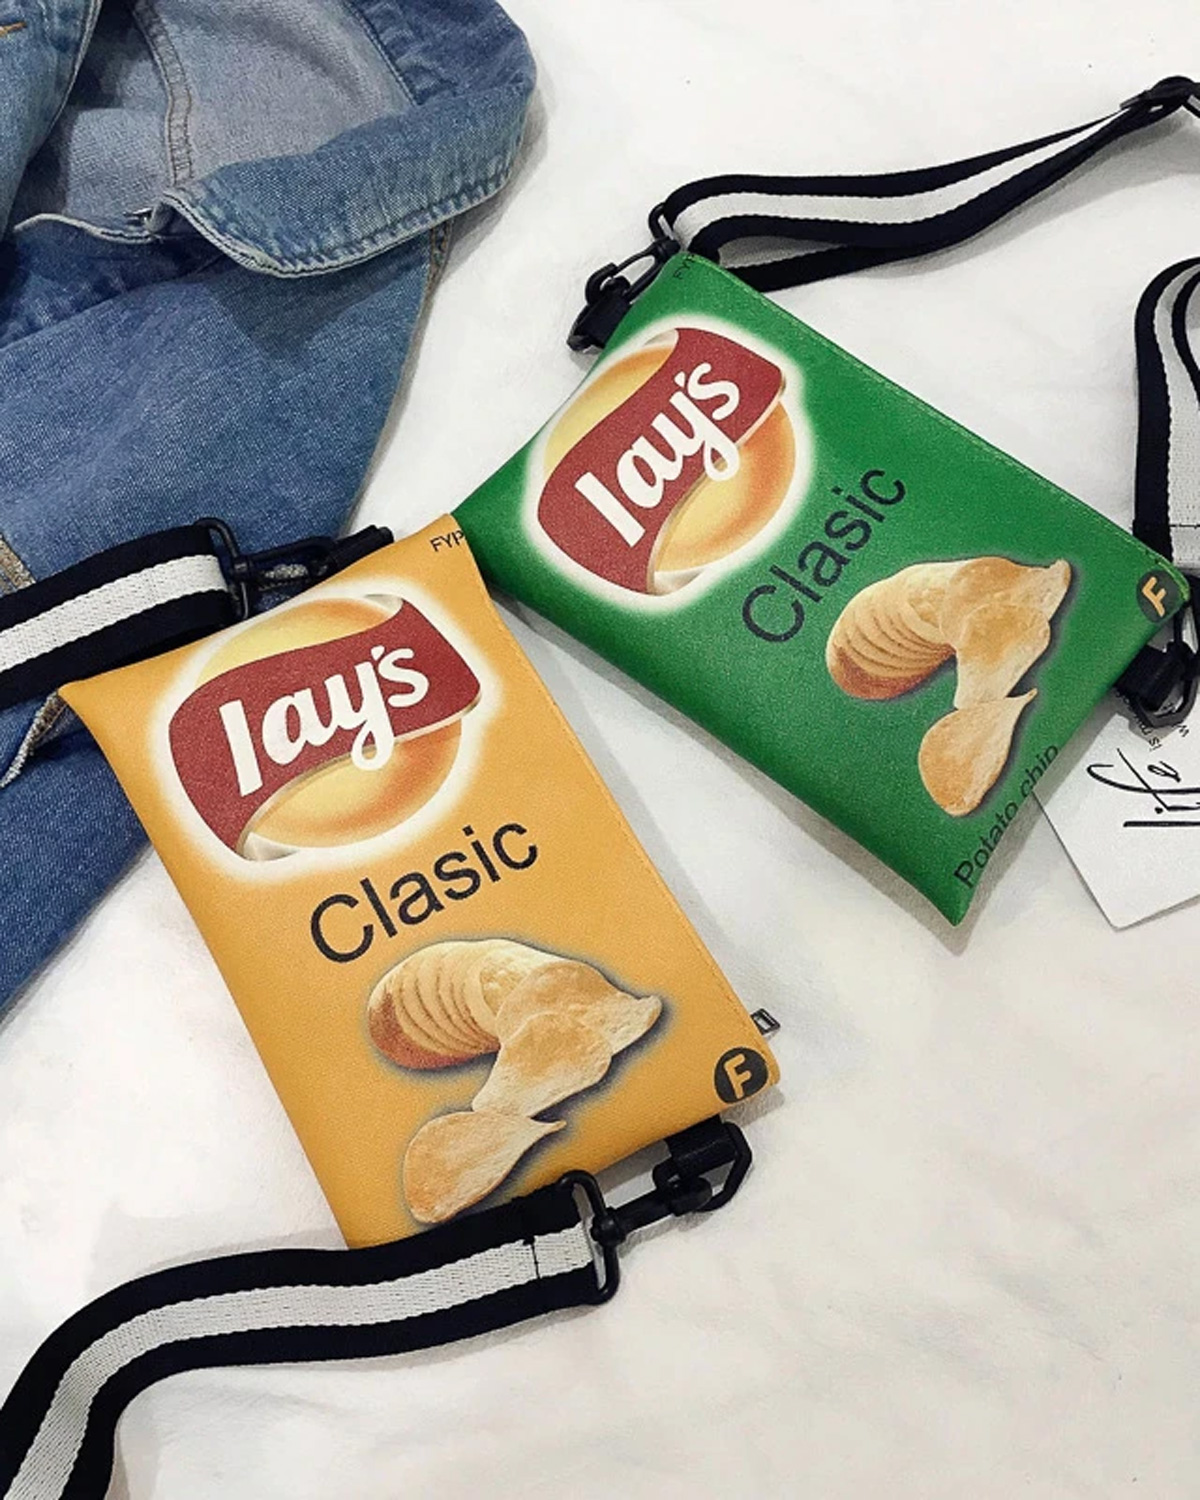 After trash bag, new Balenciaga bag is a packet your Lays chips